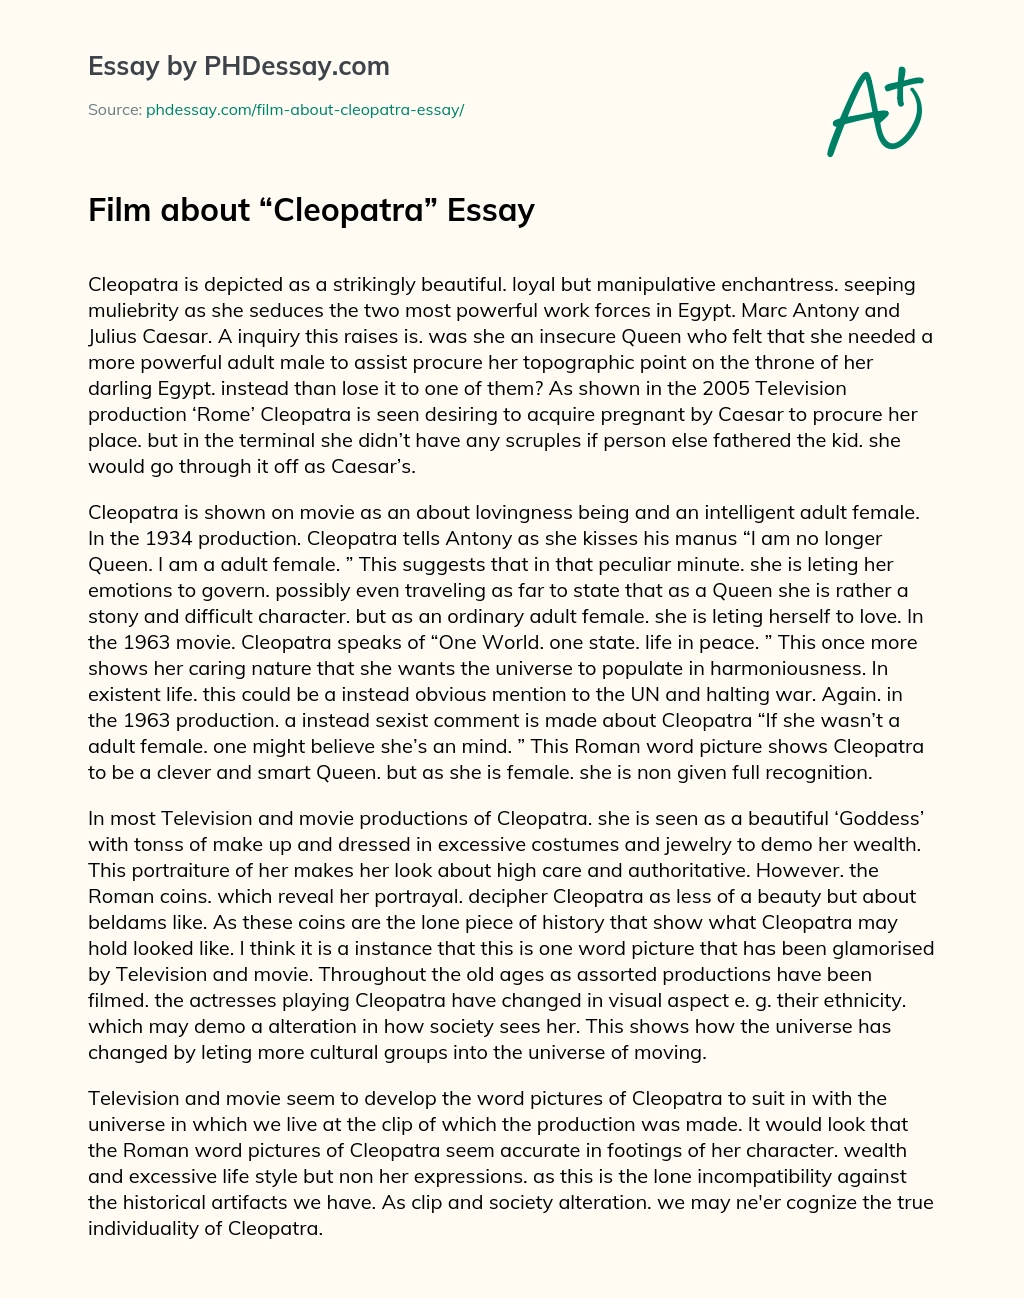 Film about “Cleopatra” Essay essay